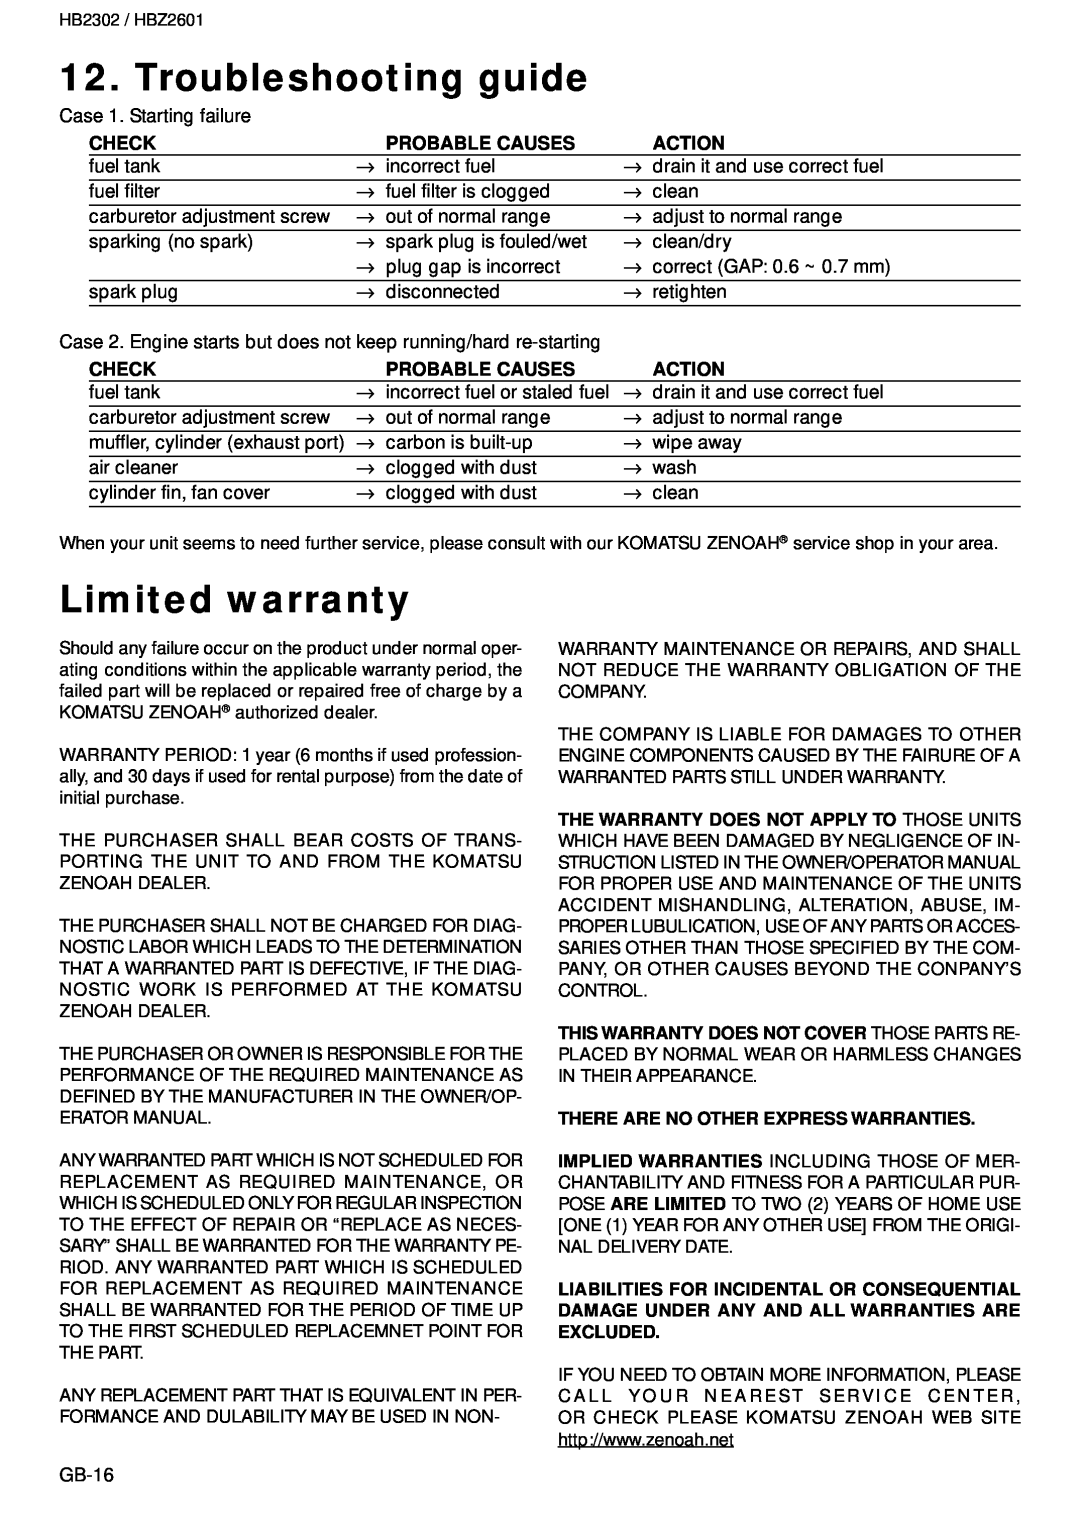 Zenoah HBZ2601, HB2302 owner manual Troubleshooting guide, Limited warranty, Check, Probable Causes, Action 